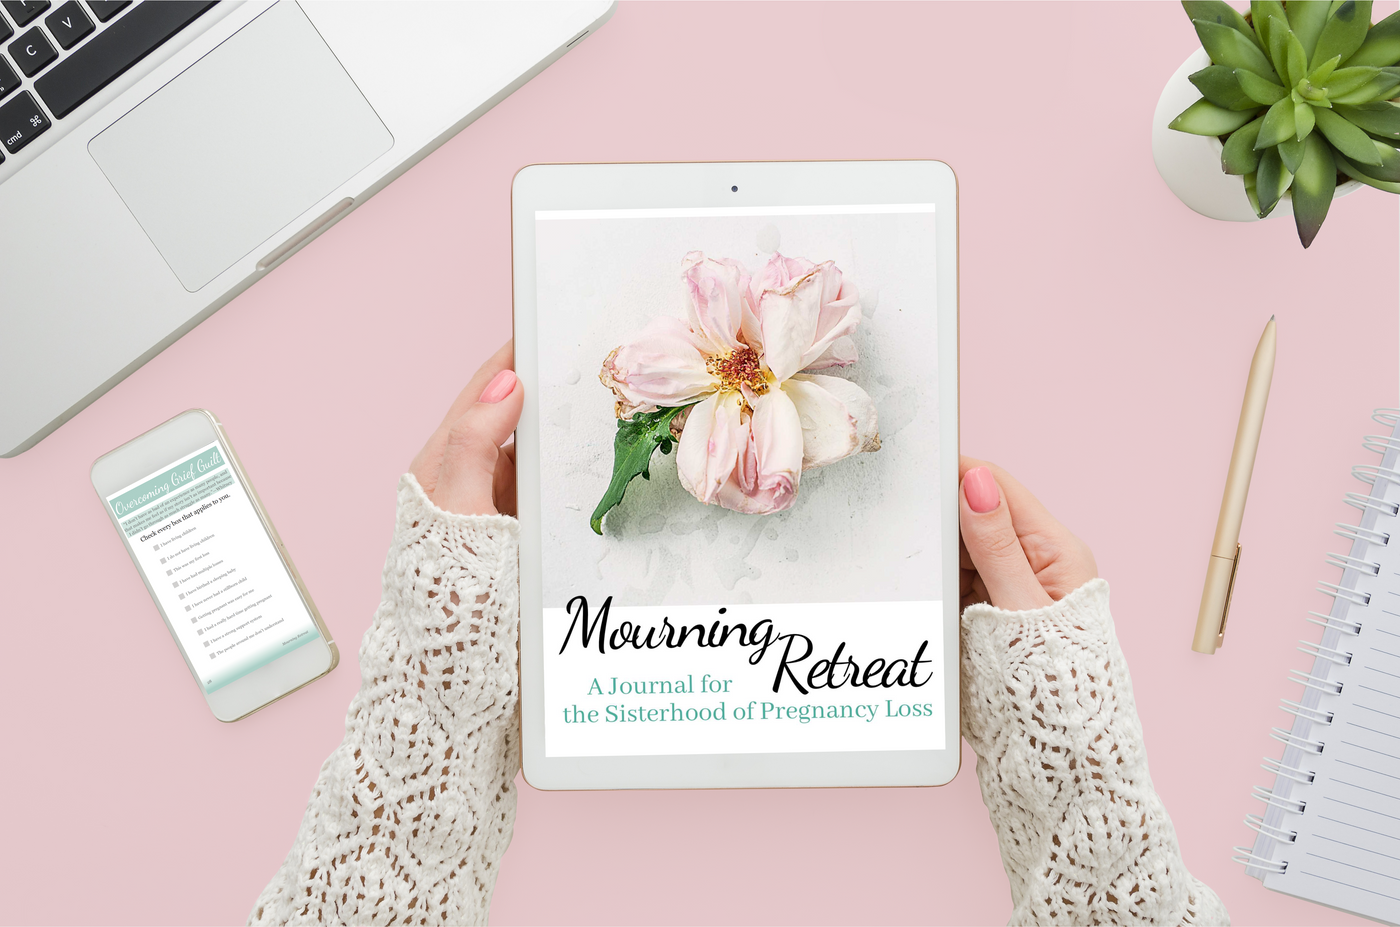 Mourning Retreat: A Journal for the Sisterhood of Pregnancy Loss E-Journal (Download)